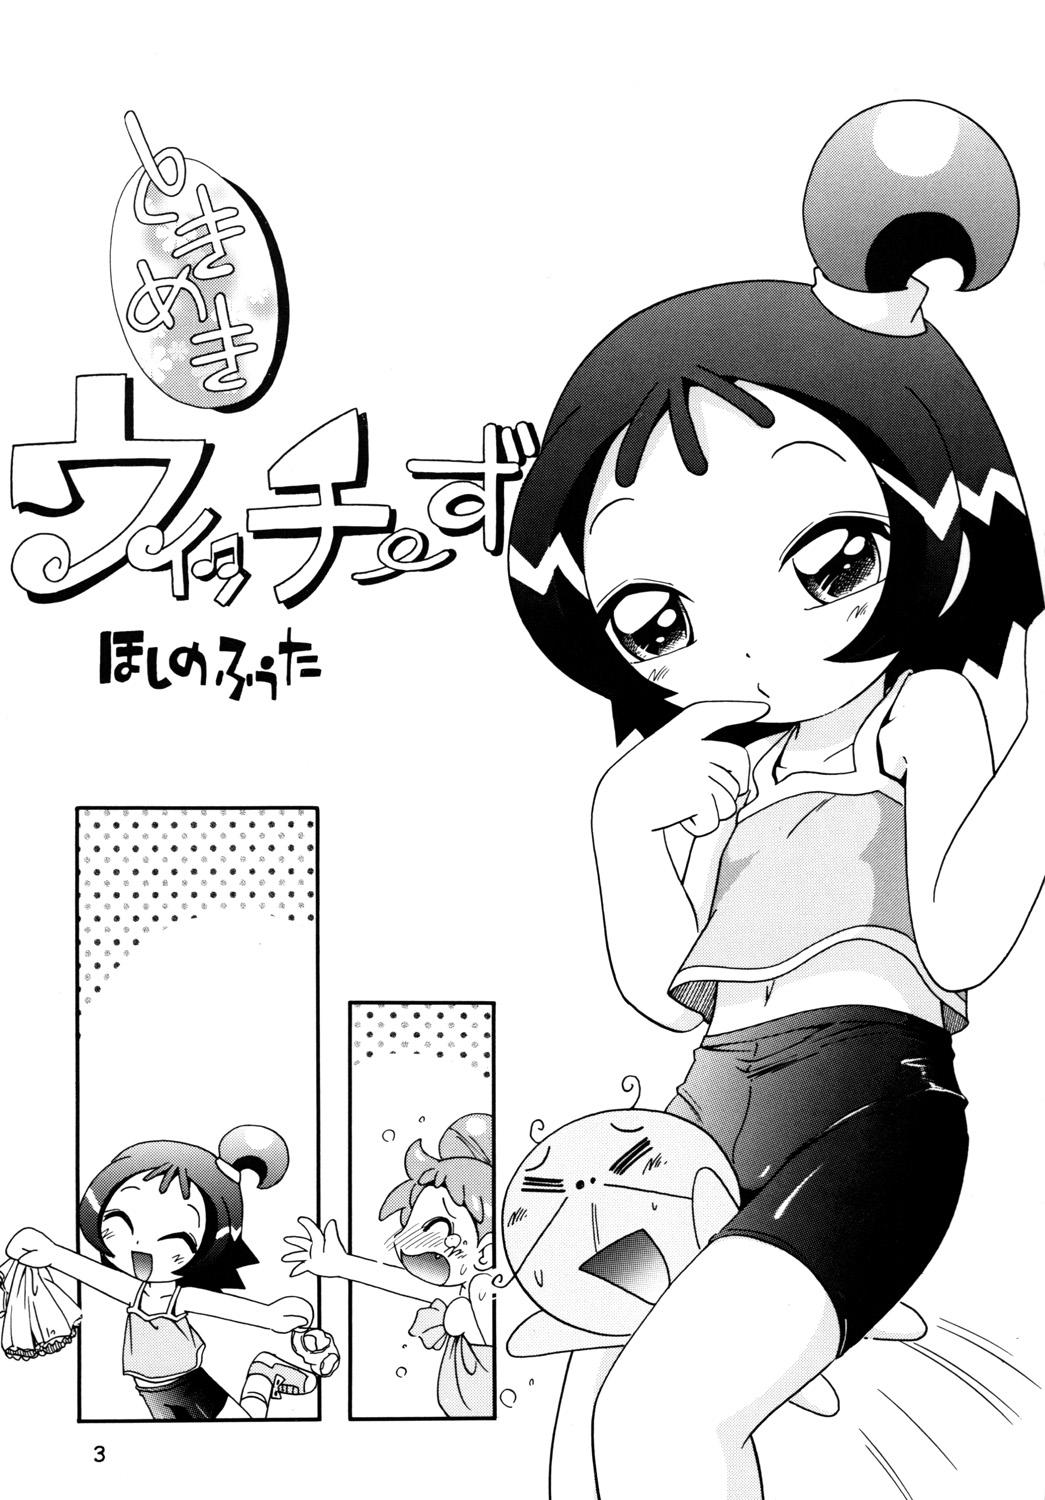 Old And Young Tokimeki Withches - Ojamajo doremi Tranny Sex - Page 2